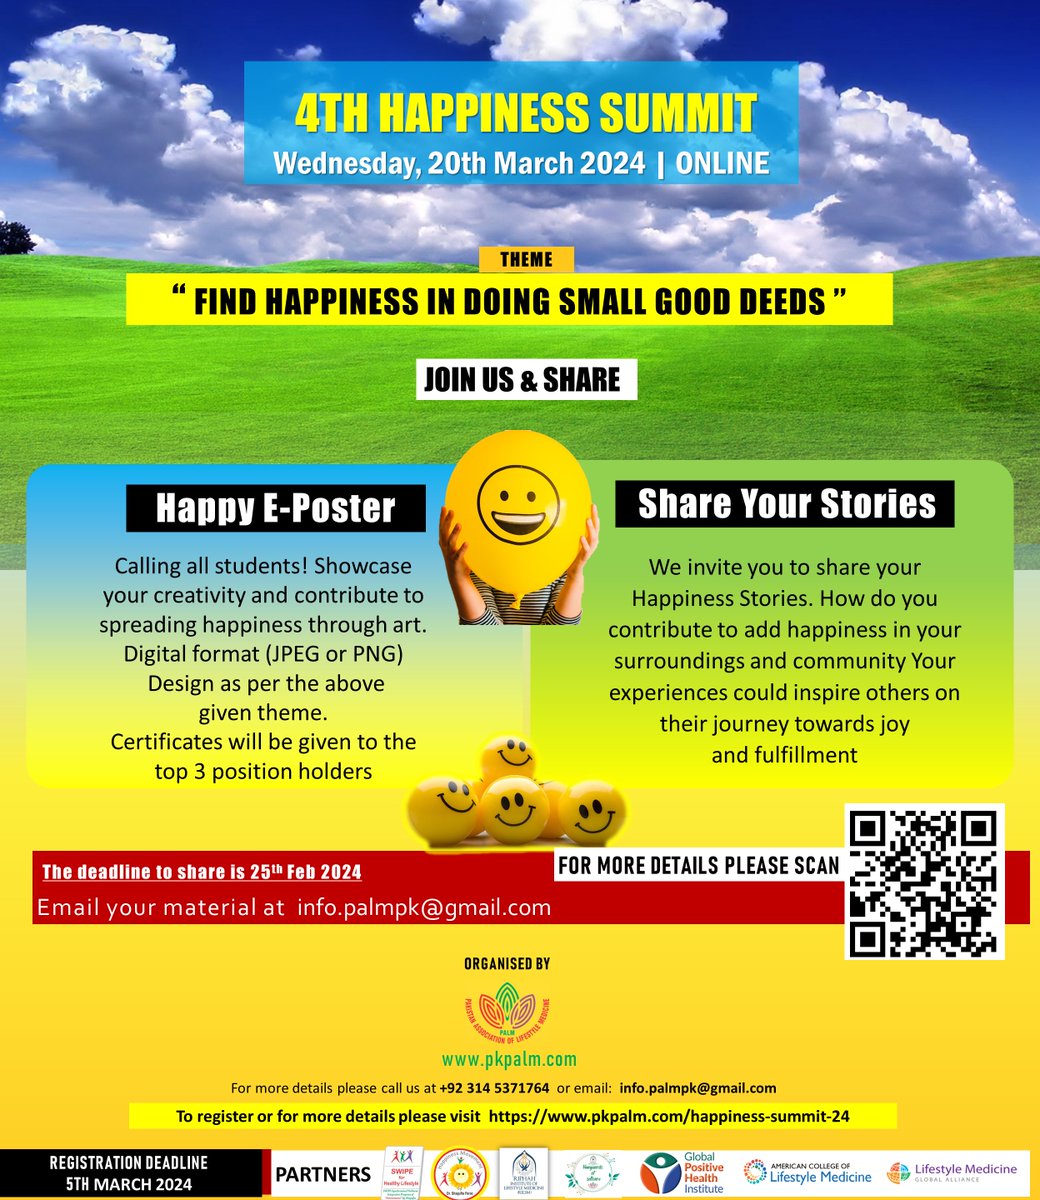 Join us for the 4TH HAPPINESS SUMMIT | 2024. The theme for this year is FIND HAPPINESS IN DOING SMALL GOOD DEEDS. You will also have the opportunity to participate as well. To register please visit us at pkpalm.com/happiness-summ…